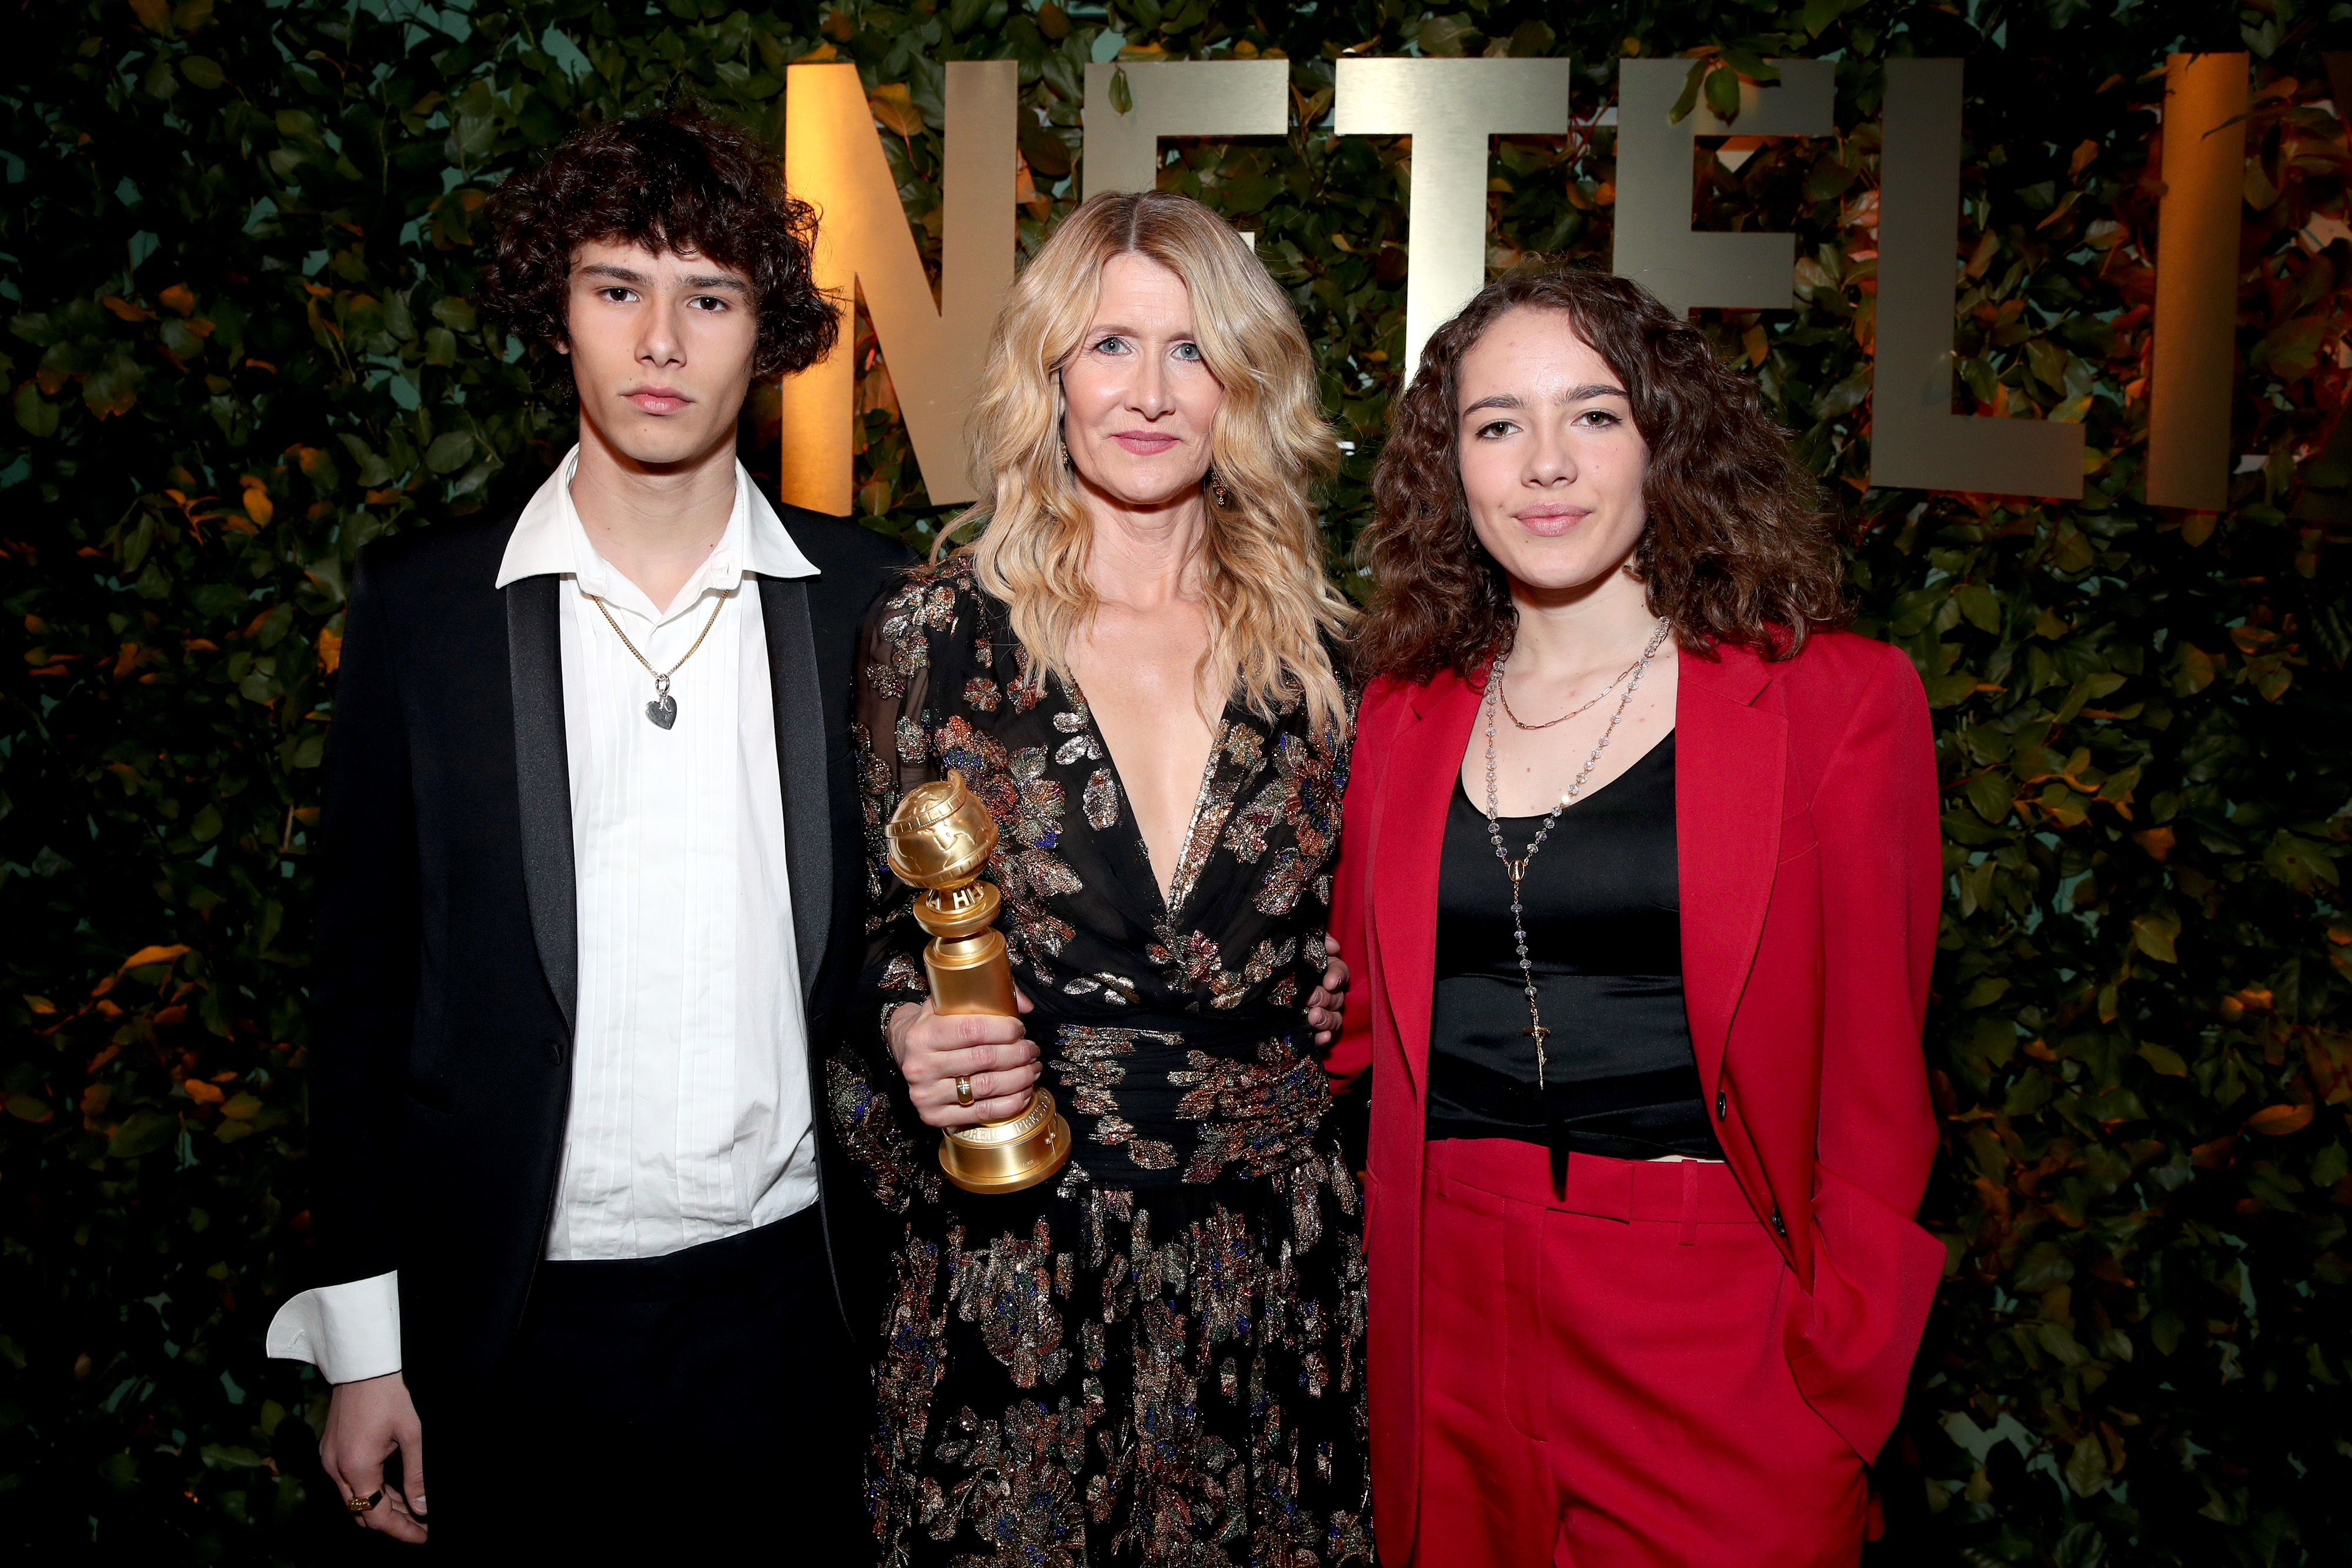 <p>Laura Dern posed with her kids with ex Ben Harper -- son Ellery Harper (who was born in 2001) and daughter Jaya Harper (who was born in 2004) -- at the Amazon Studios <a href="https://www.wonderwall.com/awards-events/golden-globes/2020-golden-globe-awards-afterparties-3021940.gallery">Golden Globes afterparty</a> in Beverly Hills on Jan 5, 2020, after winning a best supporting actress prize for her work in "Marriage Story." In 2021, Ellery -- a musician and model who made his runway debut in a 2018 Calvin Klein fashion show -- landed his <a href="https://www.instagram.com/p/CL44MTsJw_W/">first magazine cover</a>, appearing on ODDA's Spring/Summer 2021 issue. </p>